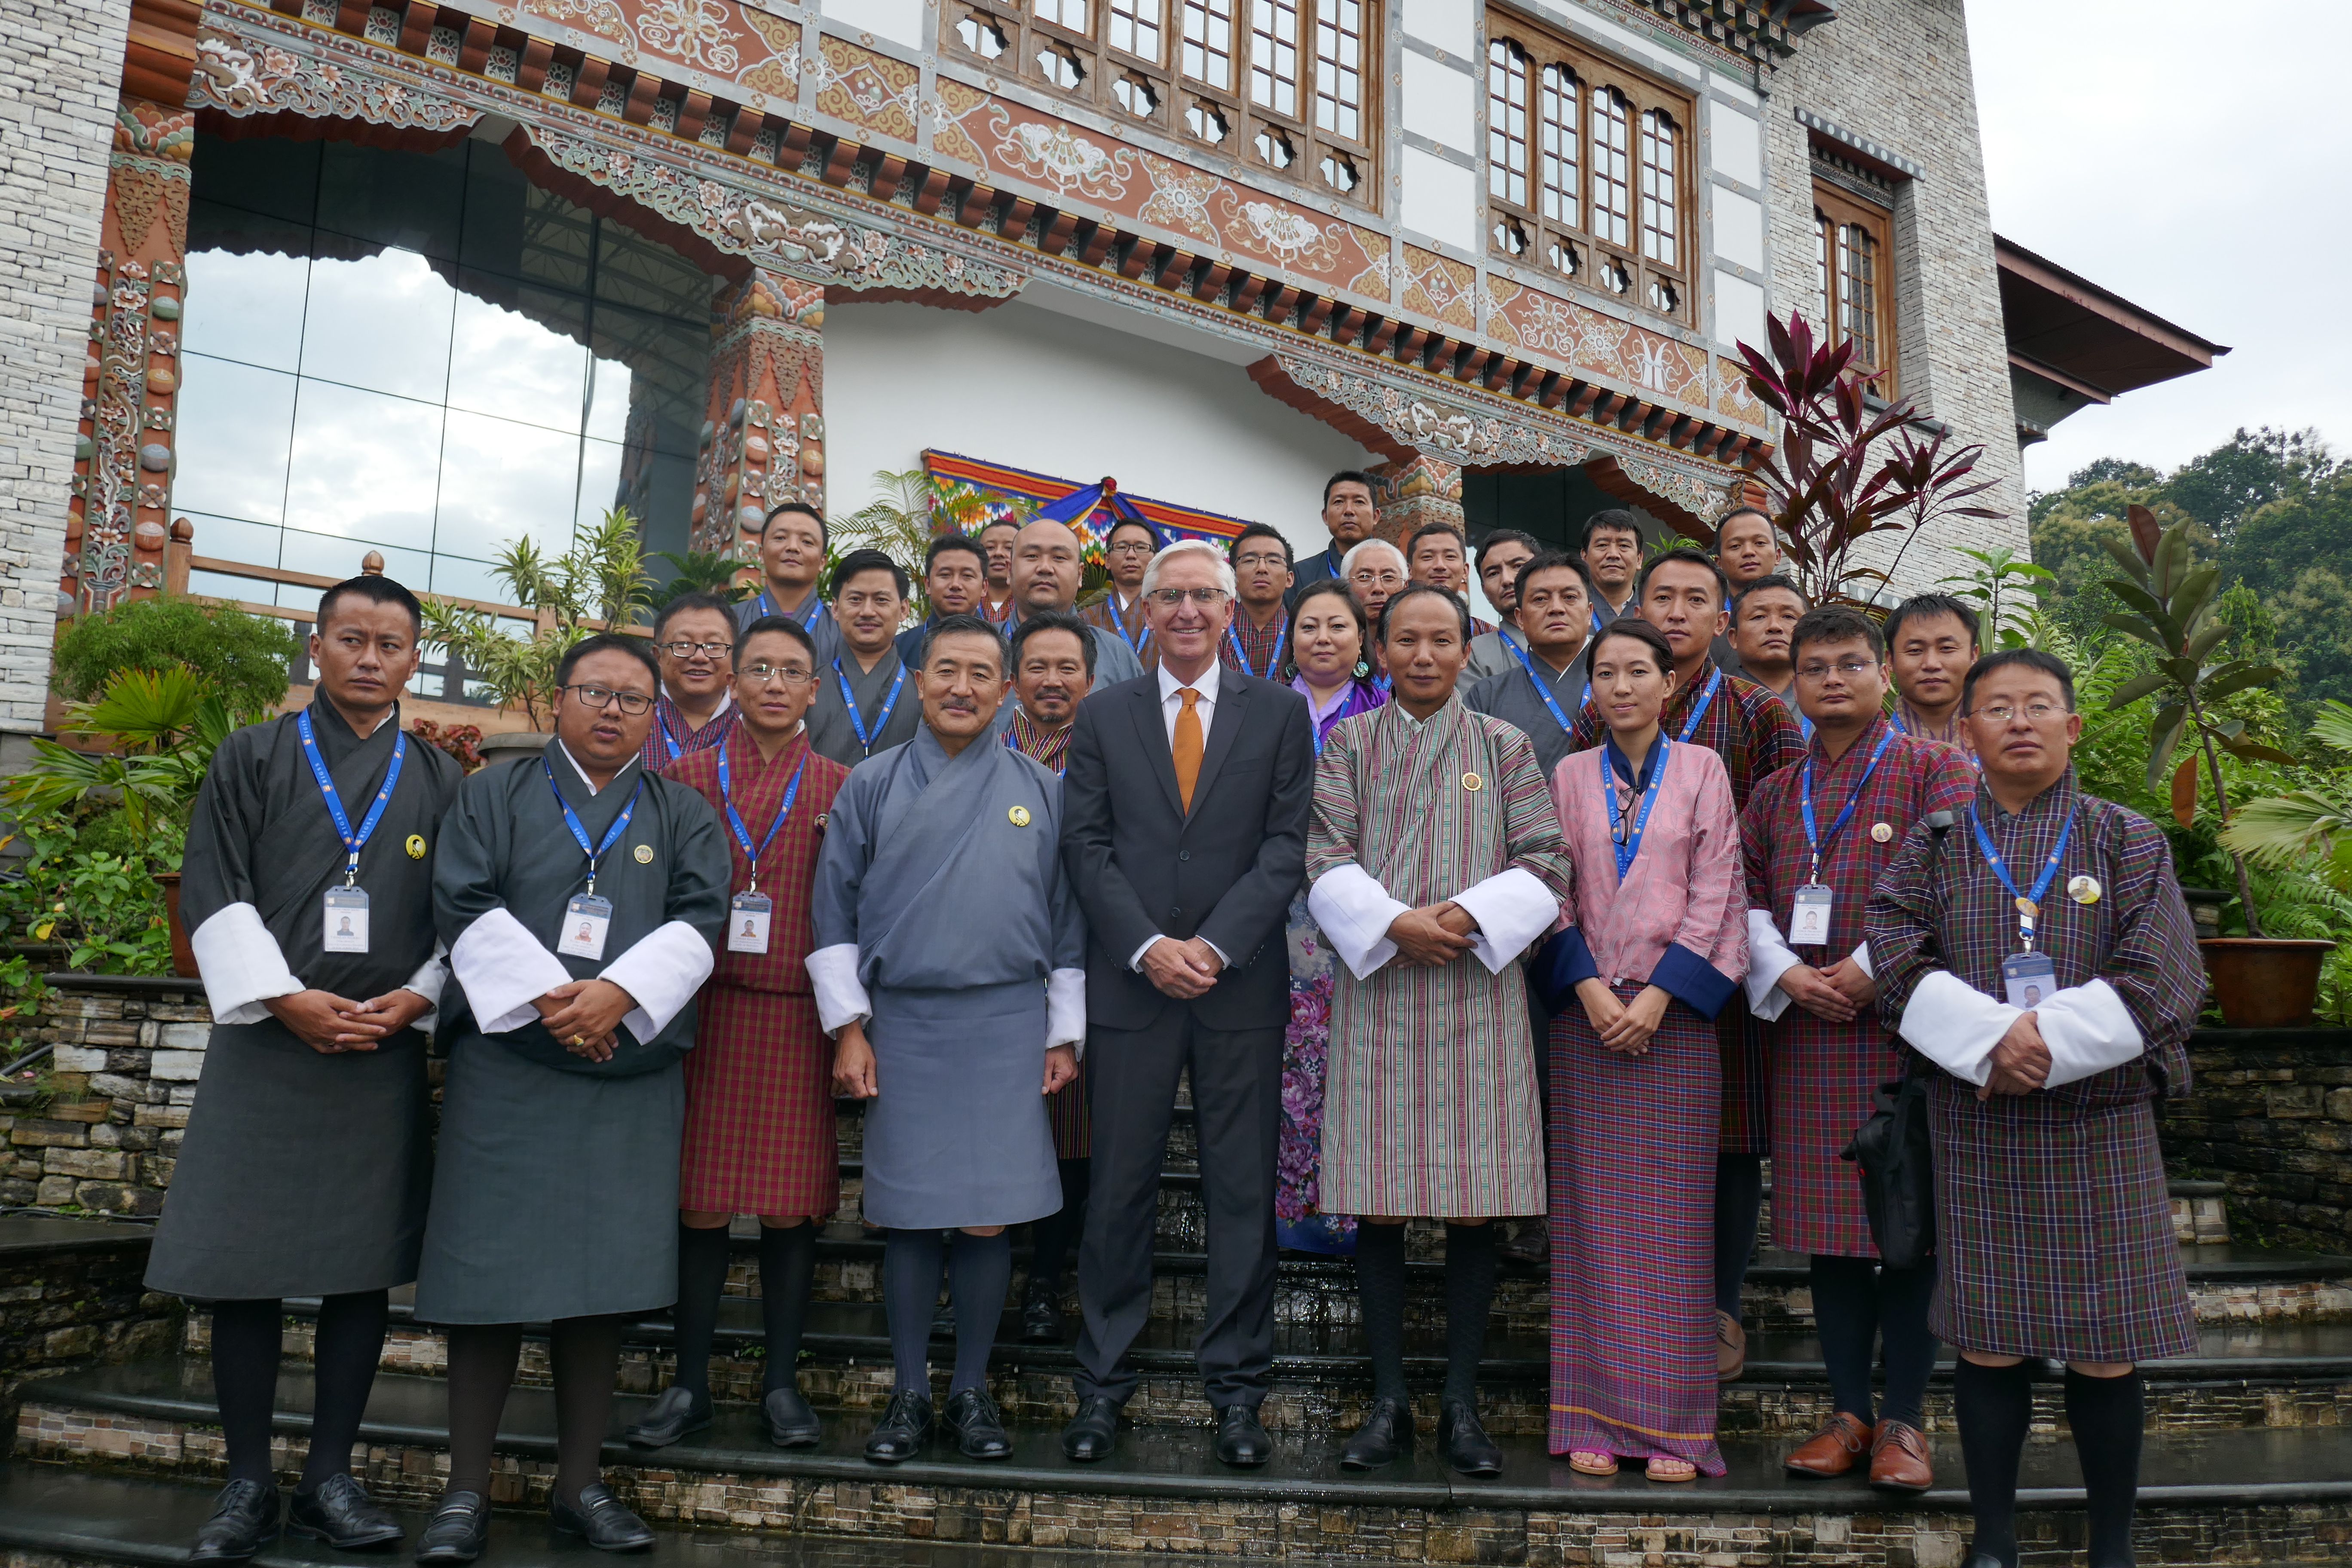 Clingendael Academy Director Ron Ton with participants from Bhutan